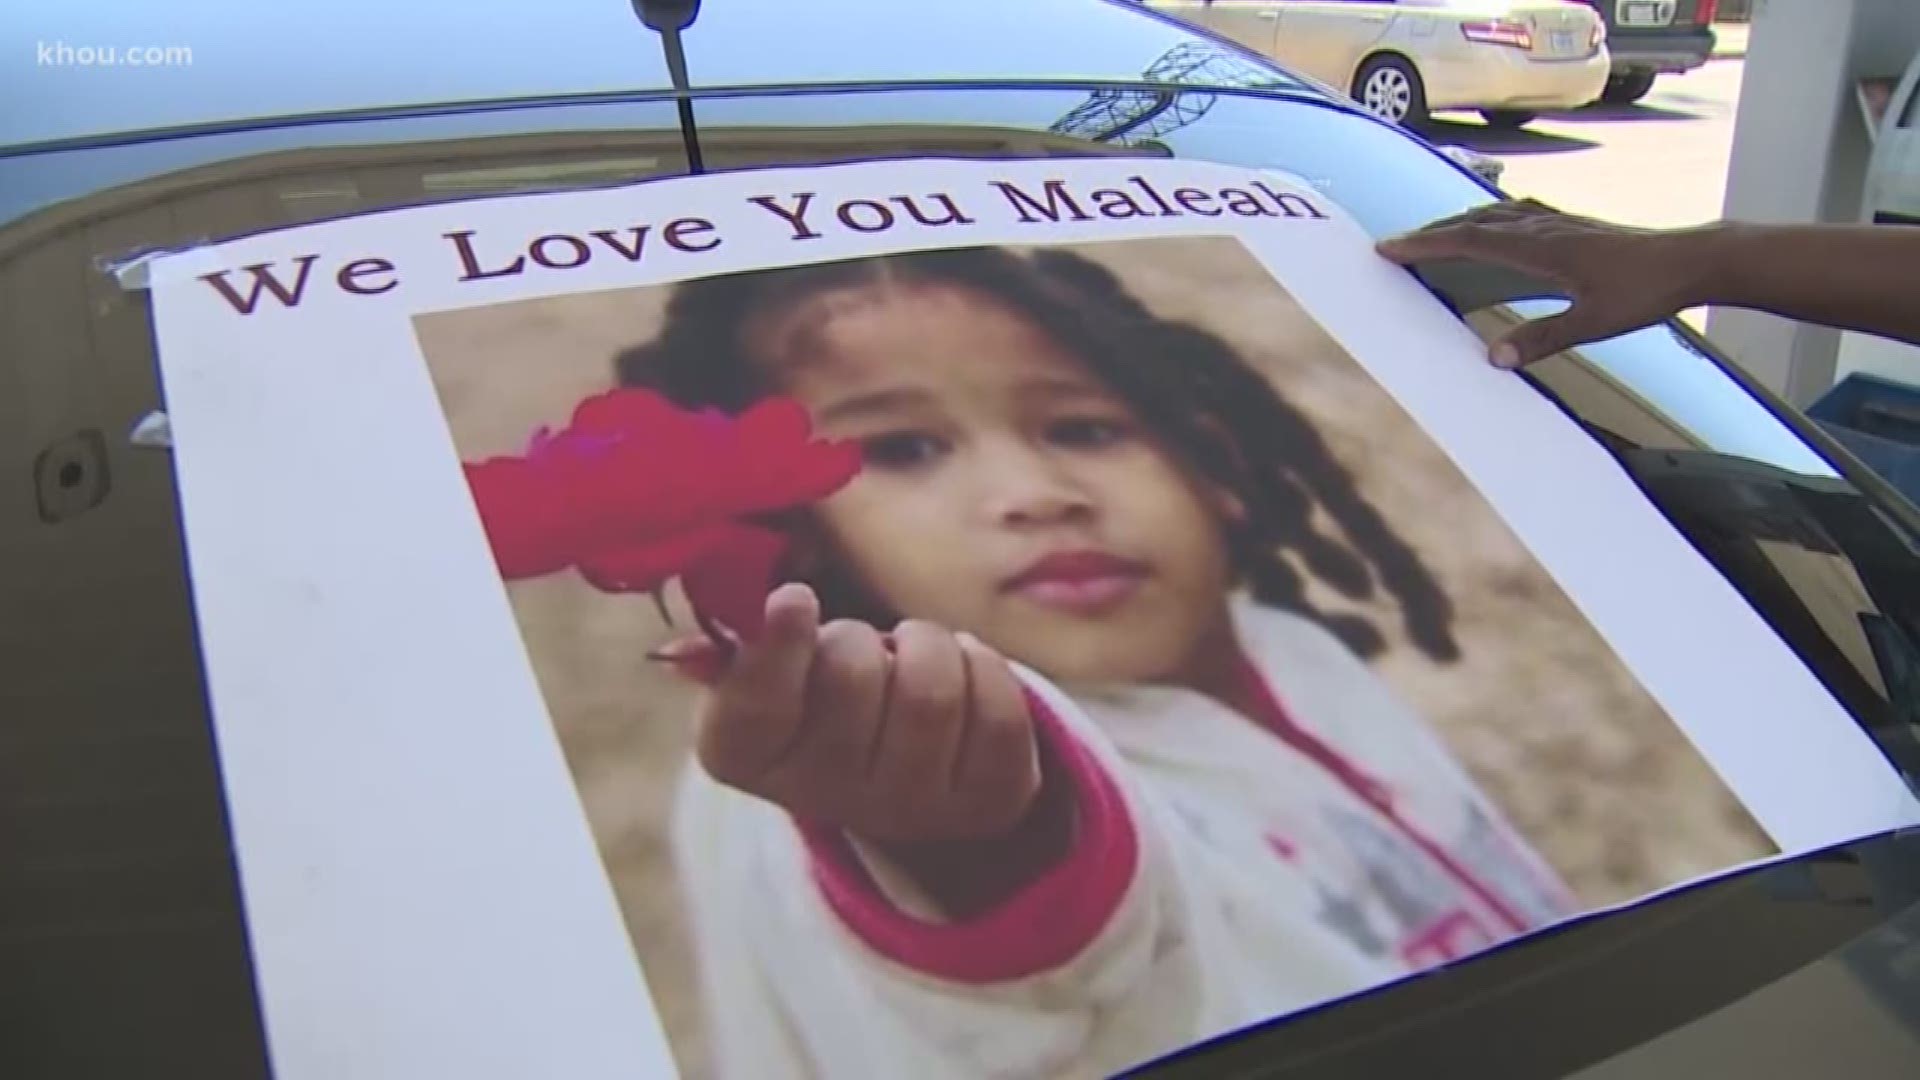 Crews are continuing their search of finding missing 4-year-old Maleah Davis. Her stepfather, Derion Vence, is accused of making the comment that if he ever killed someone he knew some places to hide the body.